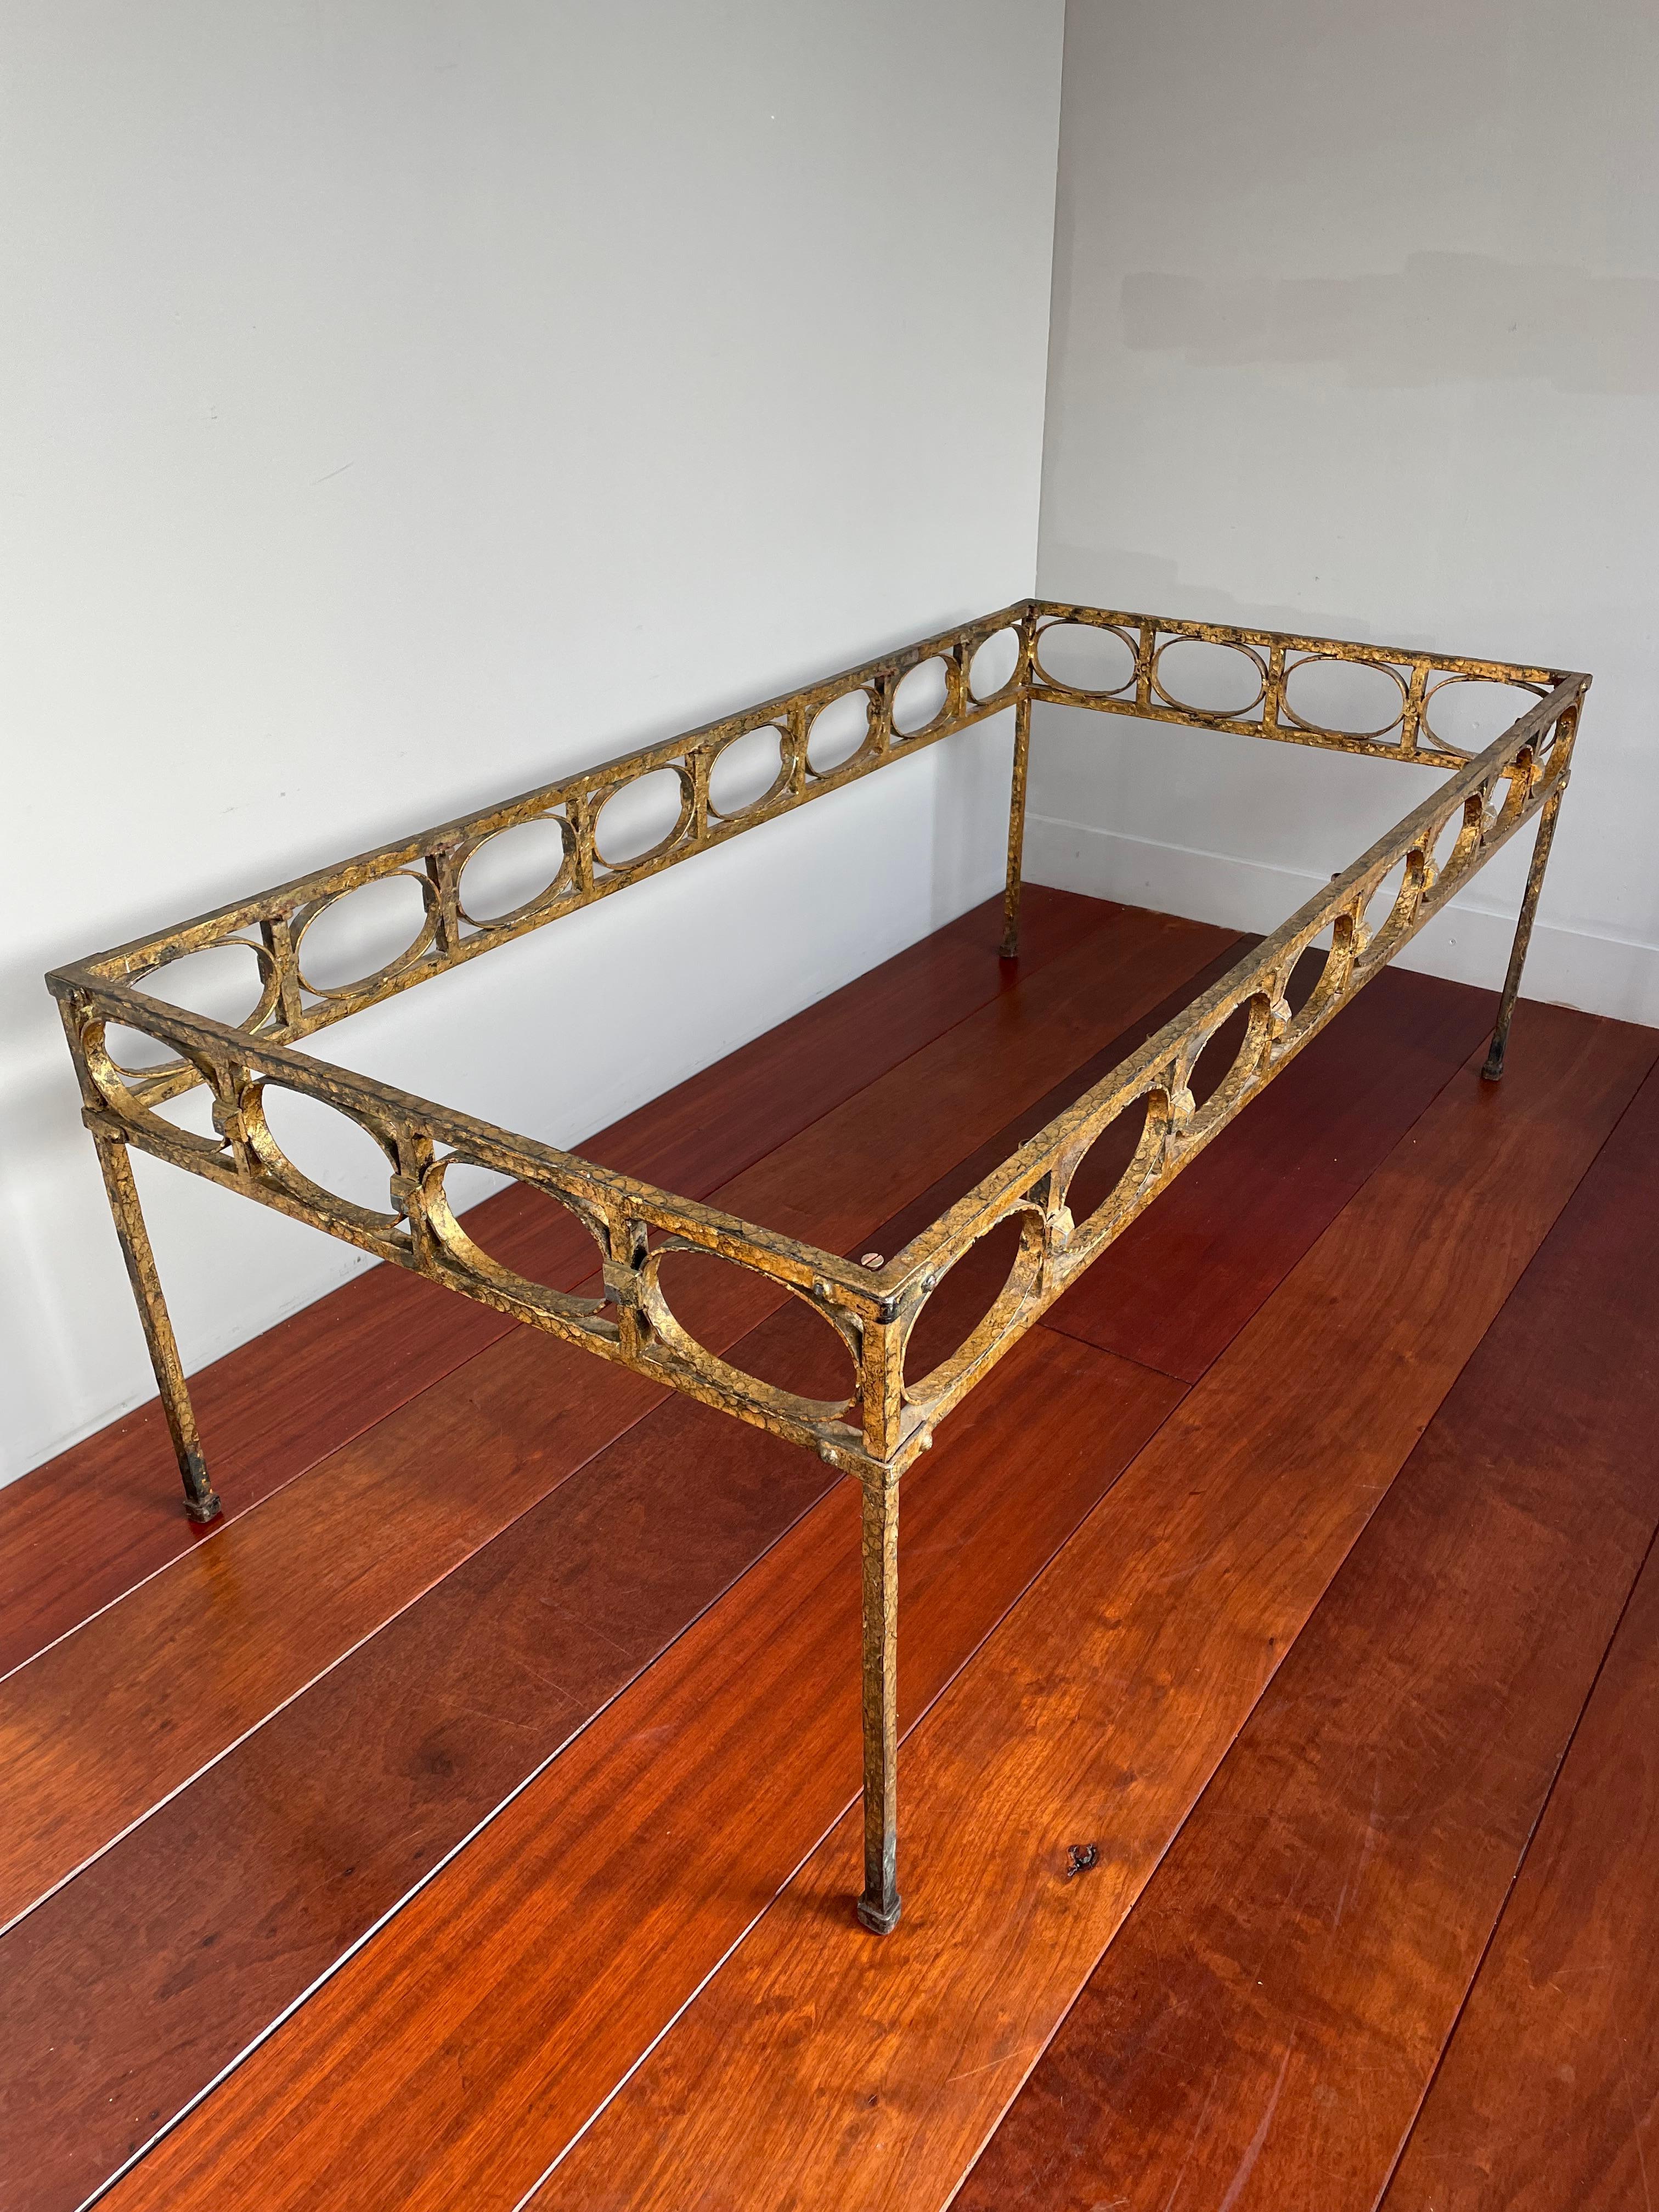 Stunning Midcentury Modern Gilt Wrought Iron Coffee Table Base by Ferro Art 1950 For Sale 12